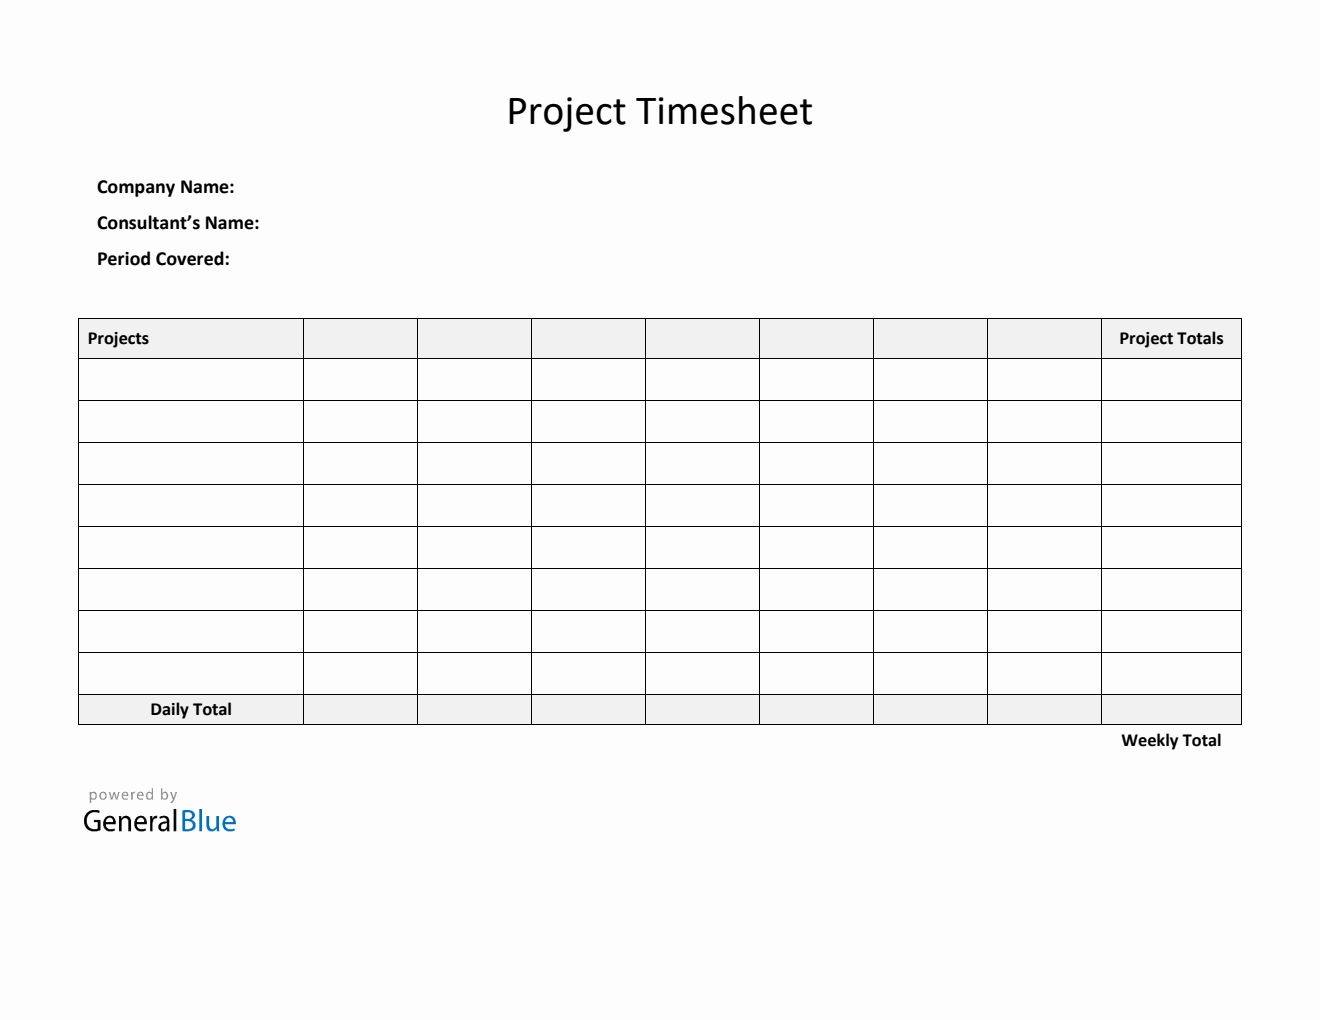 Project Timesheet in PDF (Simple)